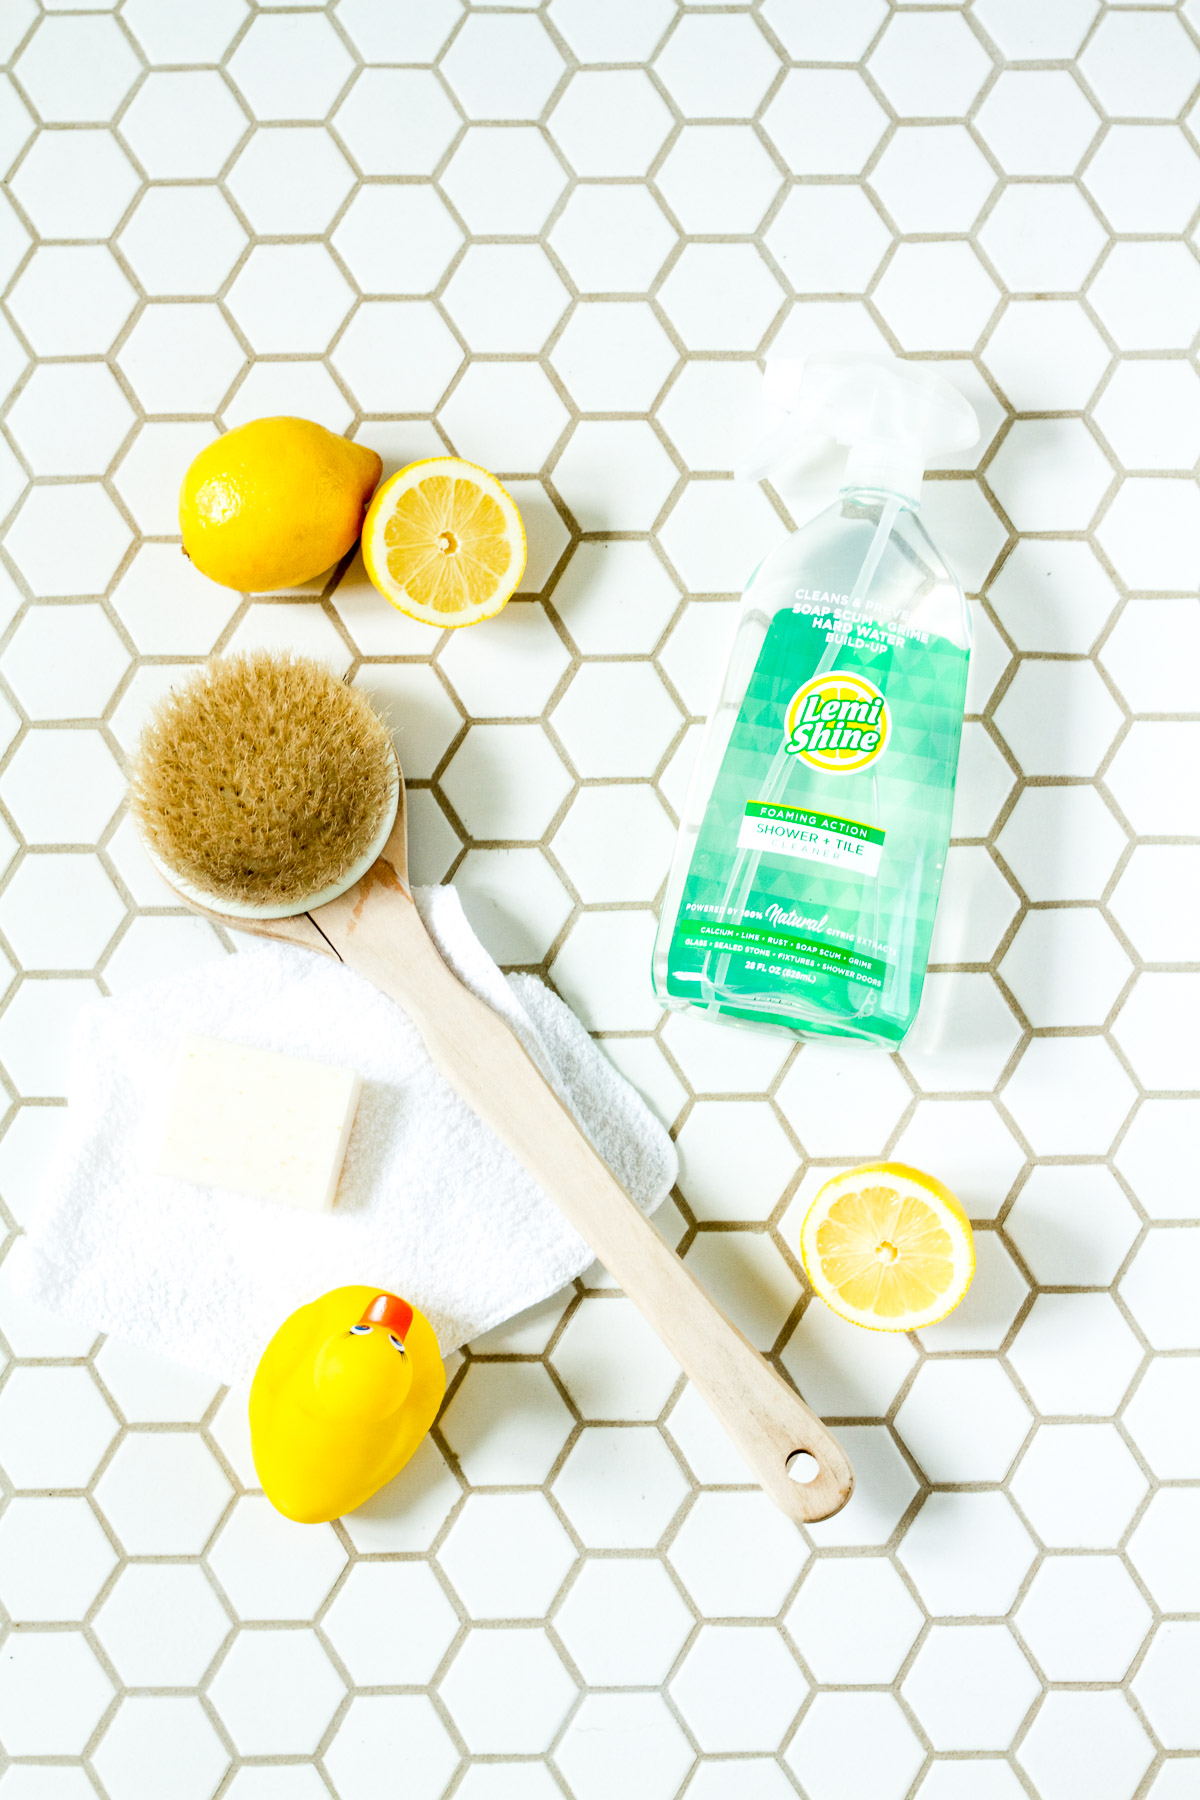 What are your secrets to a successful cleaning routine?